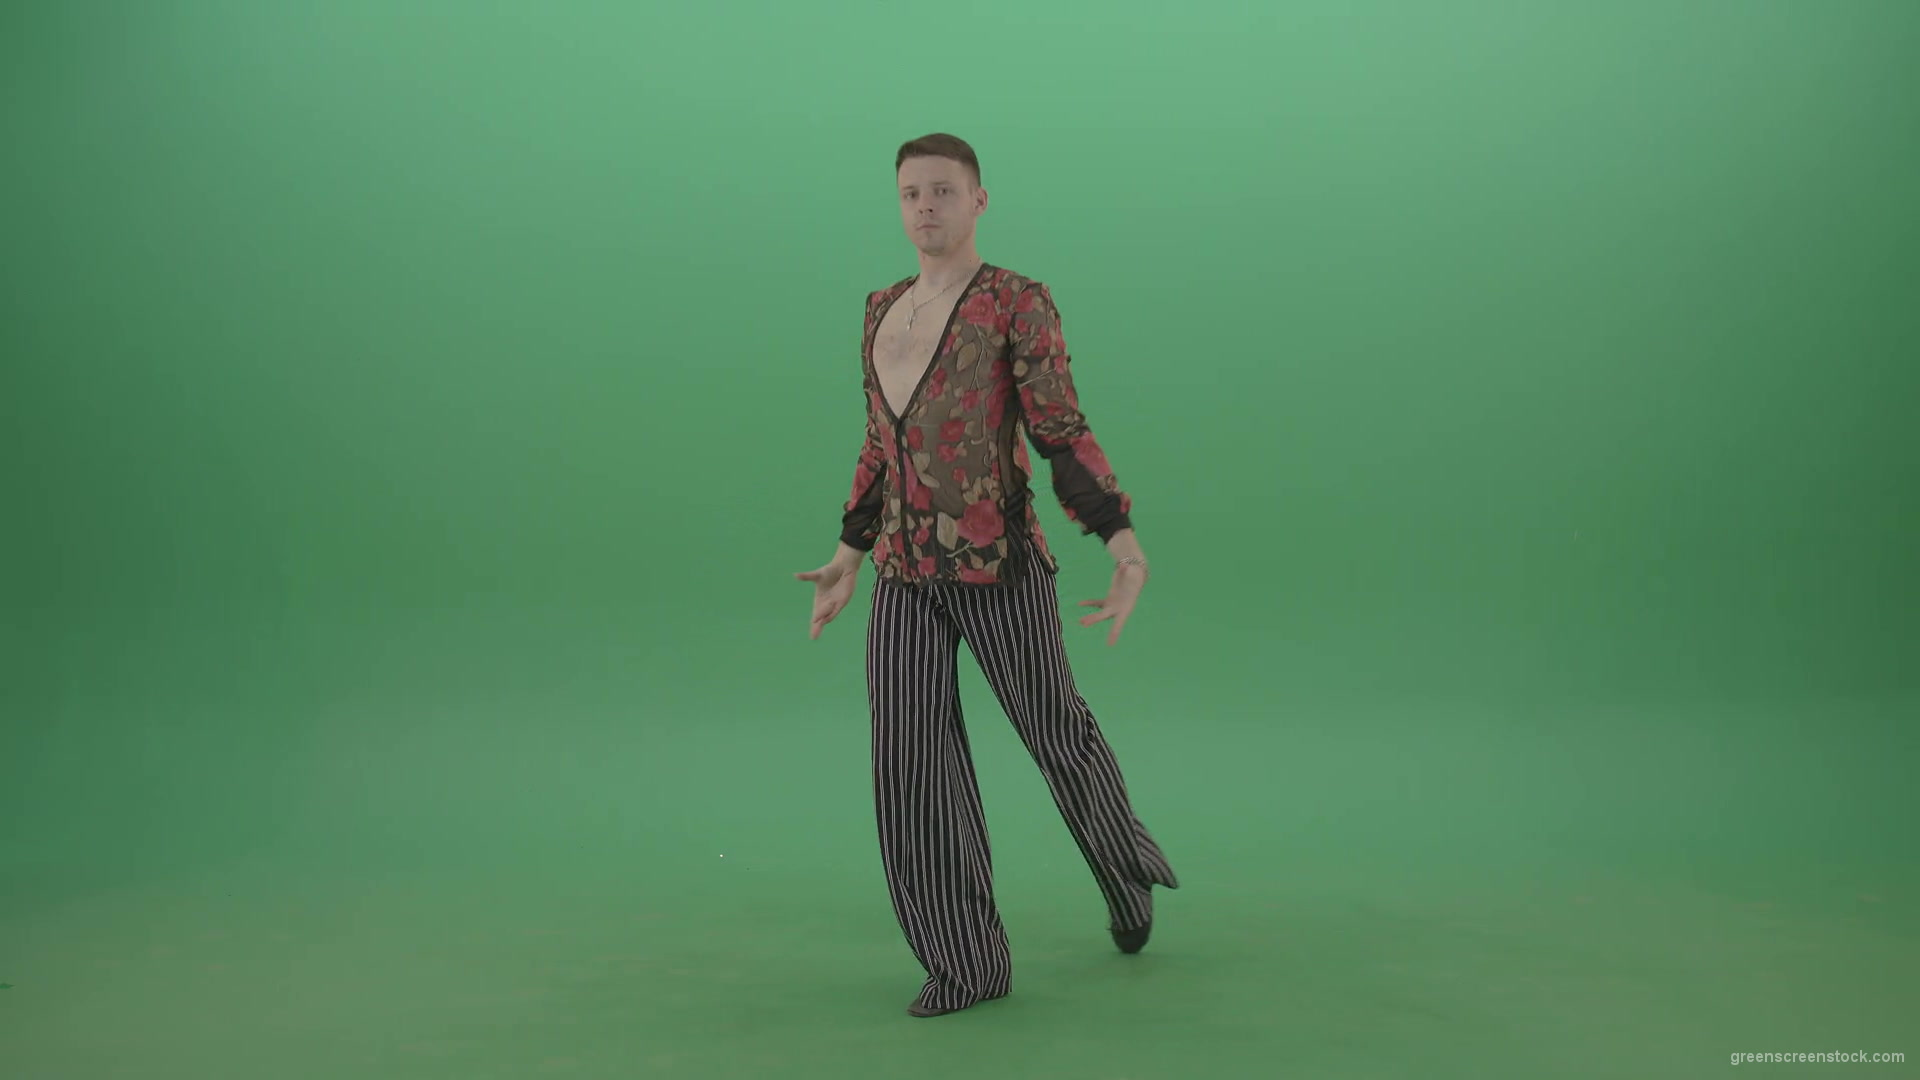 Rumba-Man-get-down-on-one-knees-and-clapping-in-hands-over-green-screen-4K-Video-Footage--1920_009 Green Screen Stock